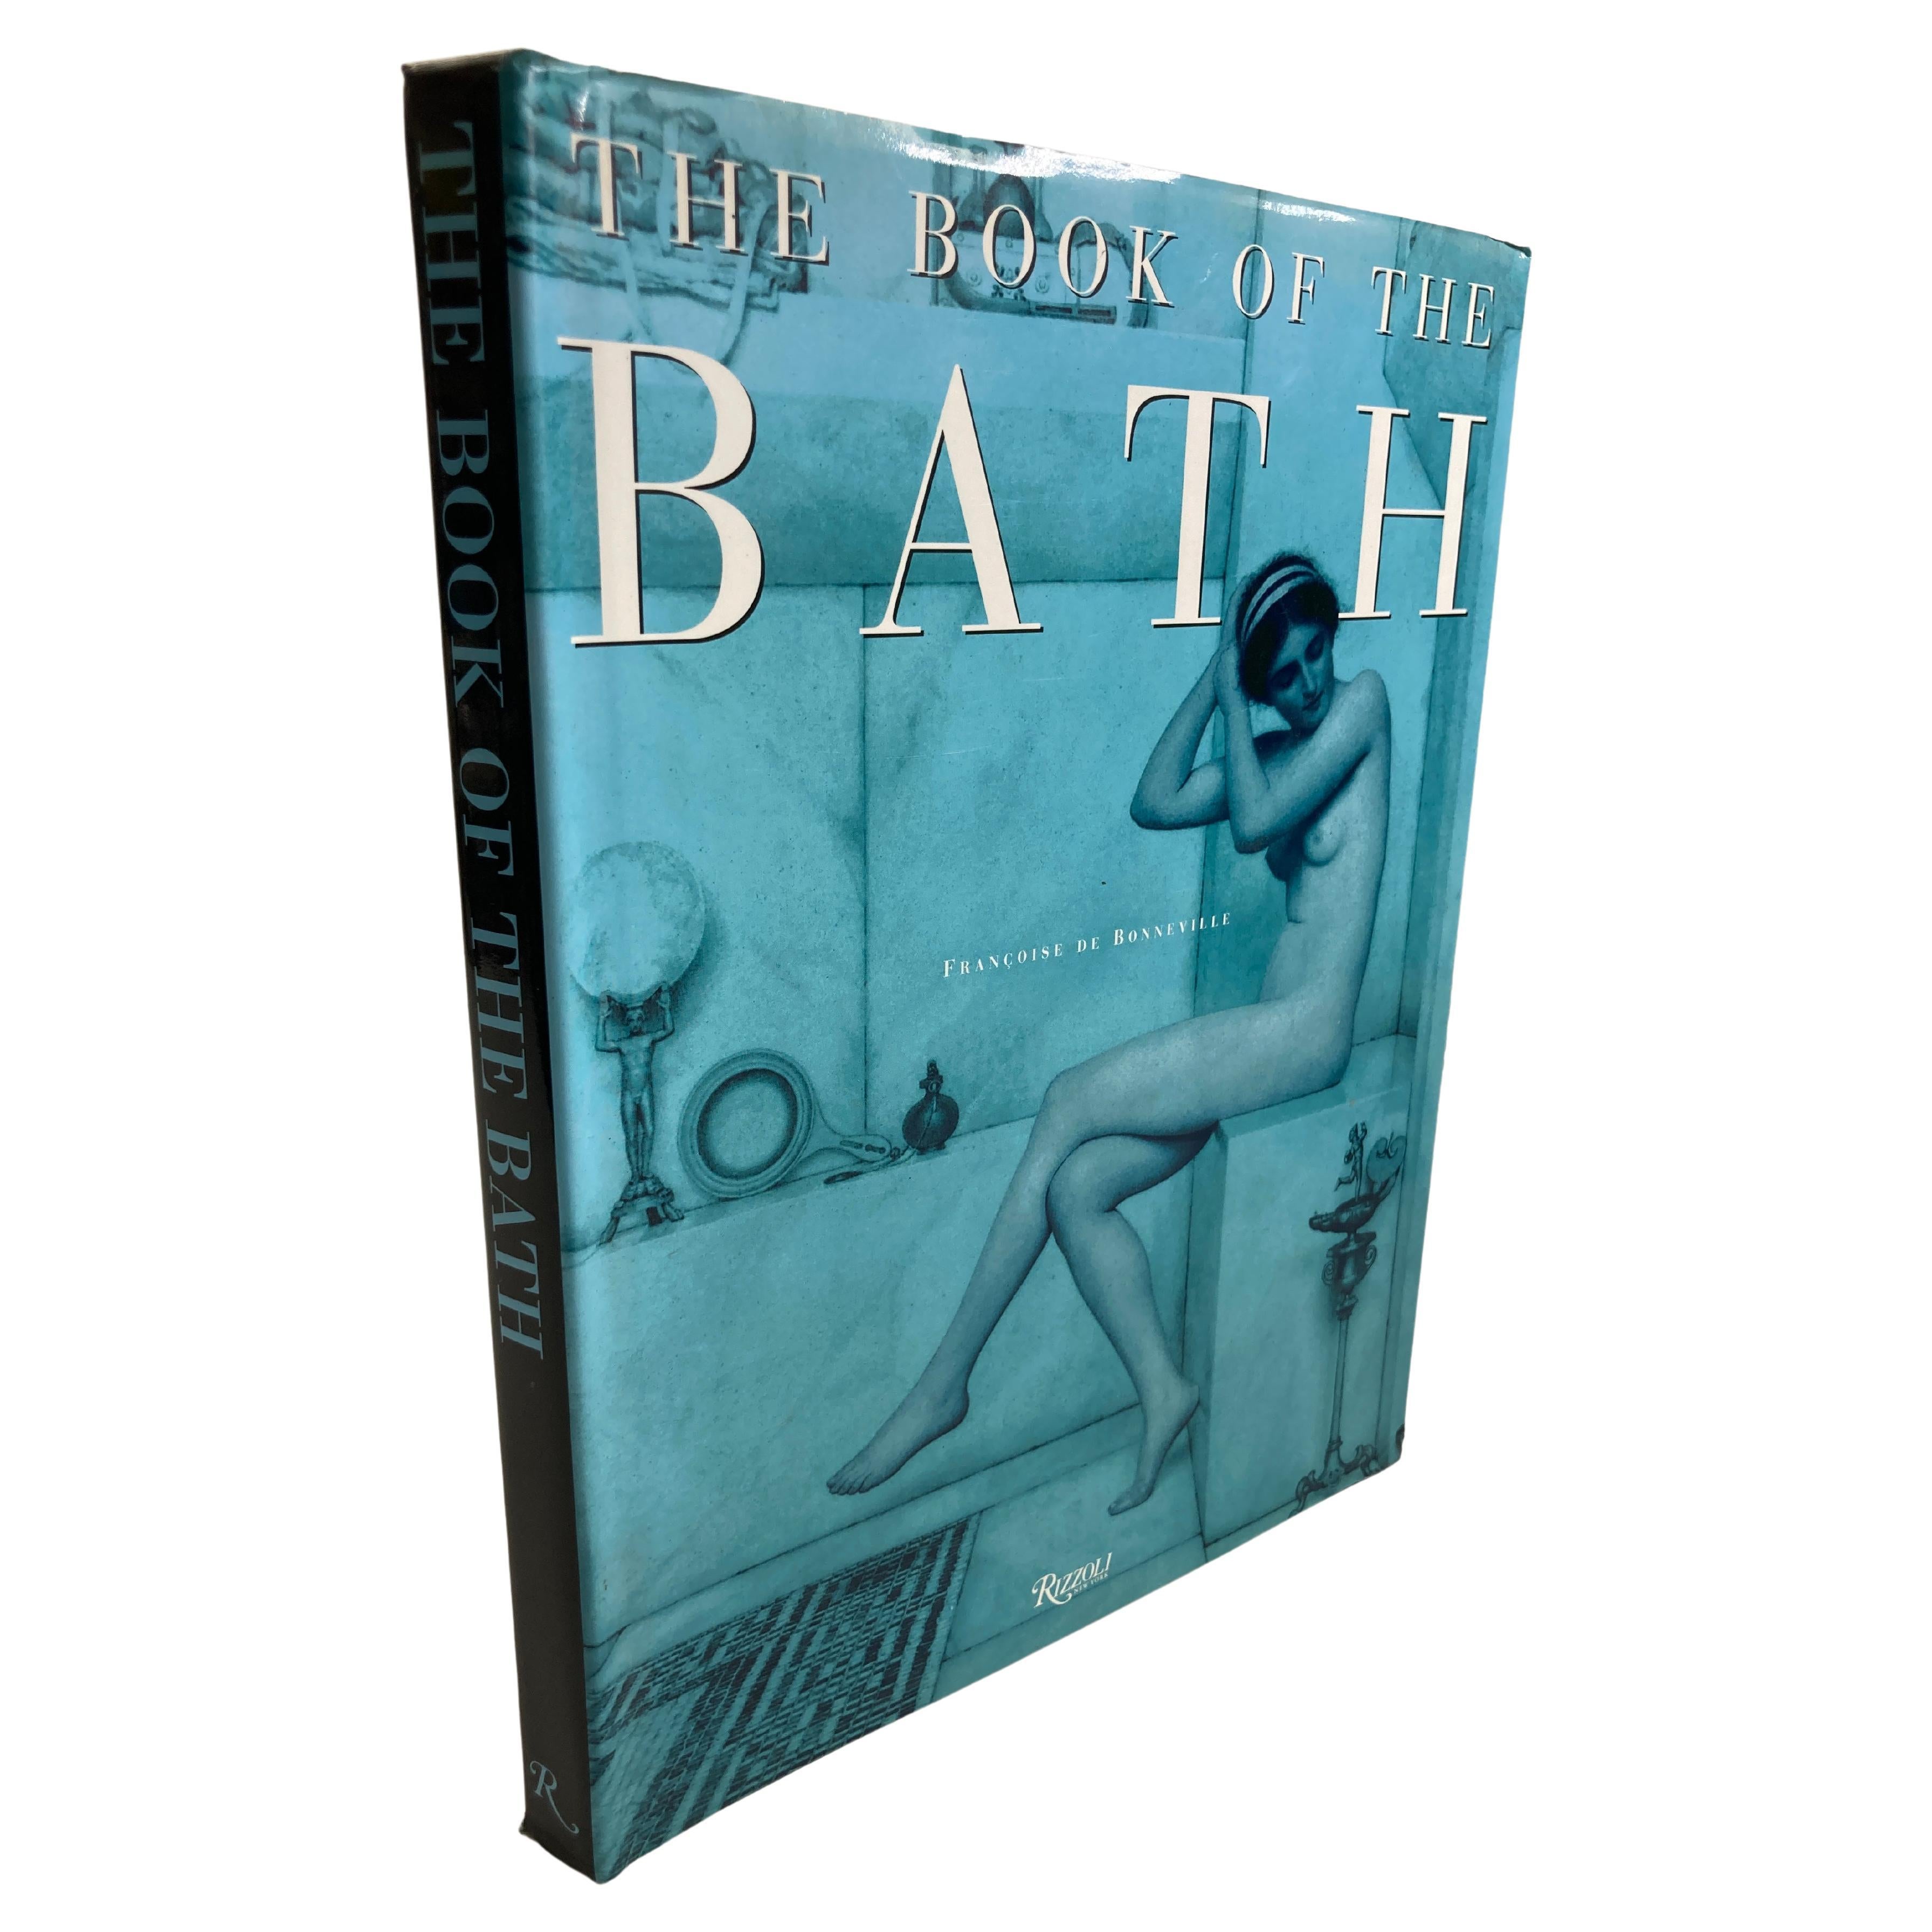 The Book of the Bath Hardcover – October 15, 1998 by Francoise De Bonneville (Author) published by Rizzoli.

1st edition, 1st printing, 1998.

For over 2000 years, in the Far East as in the West, bathing and showering have been more than practical